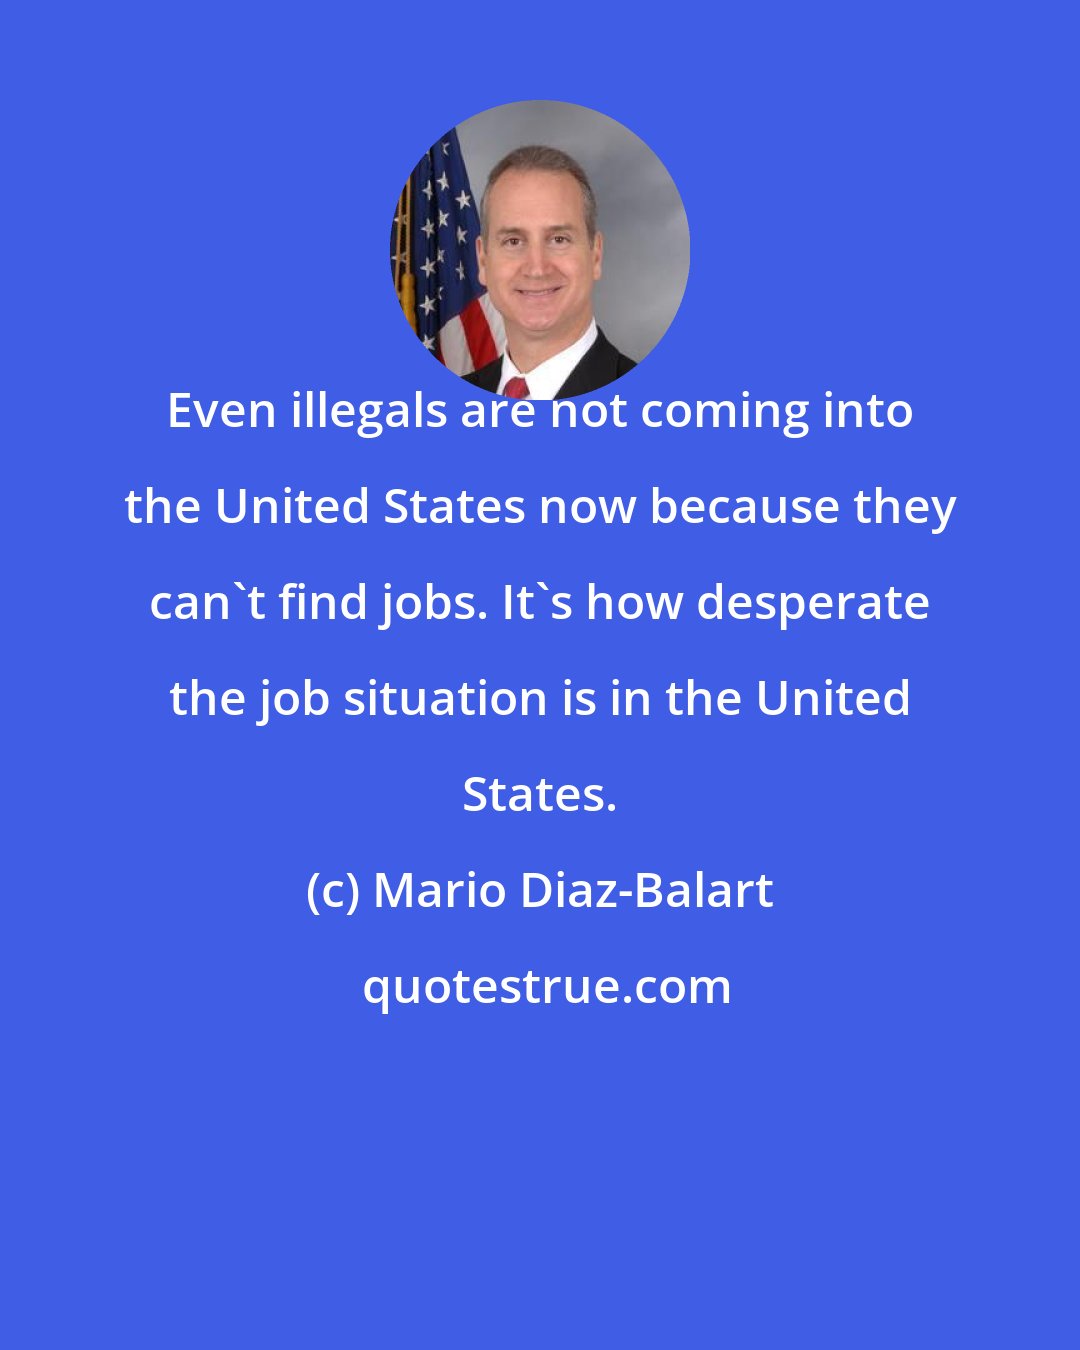 Mario Diaz-Balart: Even illegals are not coming into the United States now because they can't find jobs. It's how desperate the job situation is in the United States.